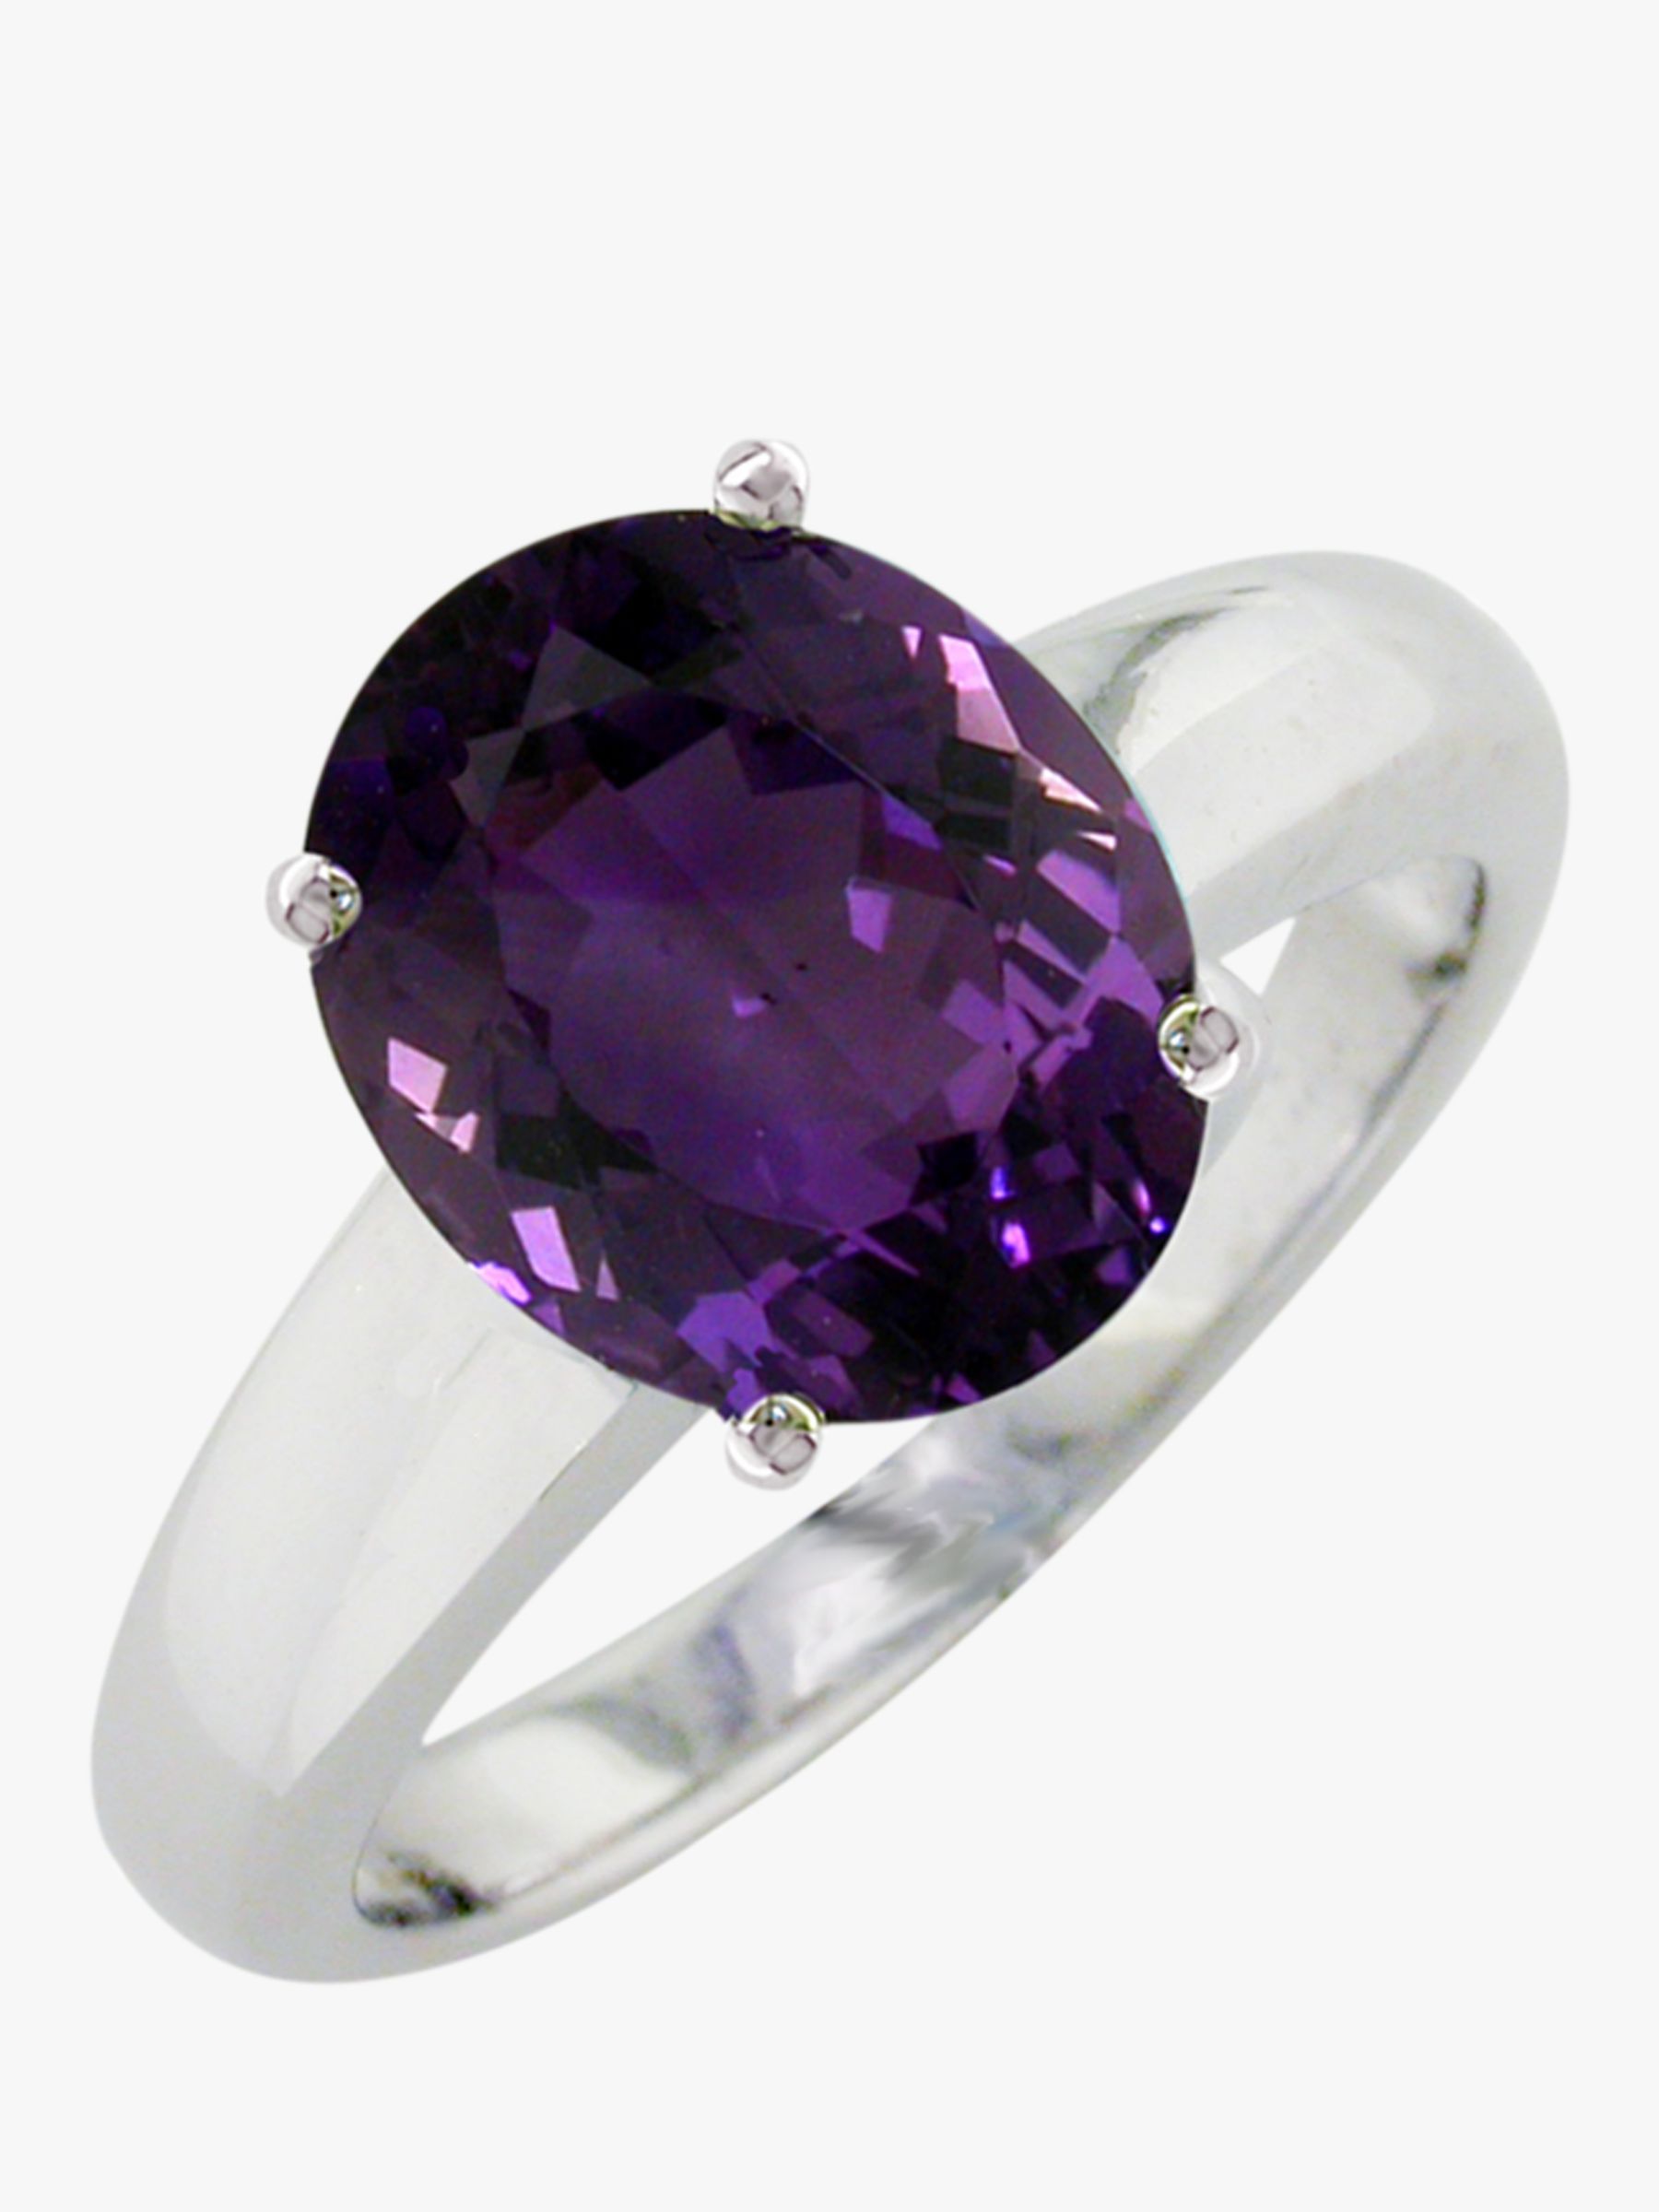 9ct White Gold Large Amethyst Ring